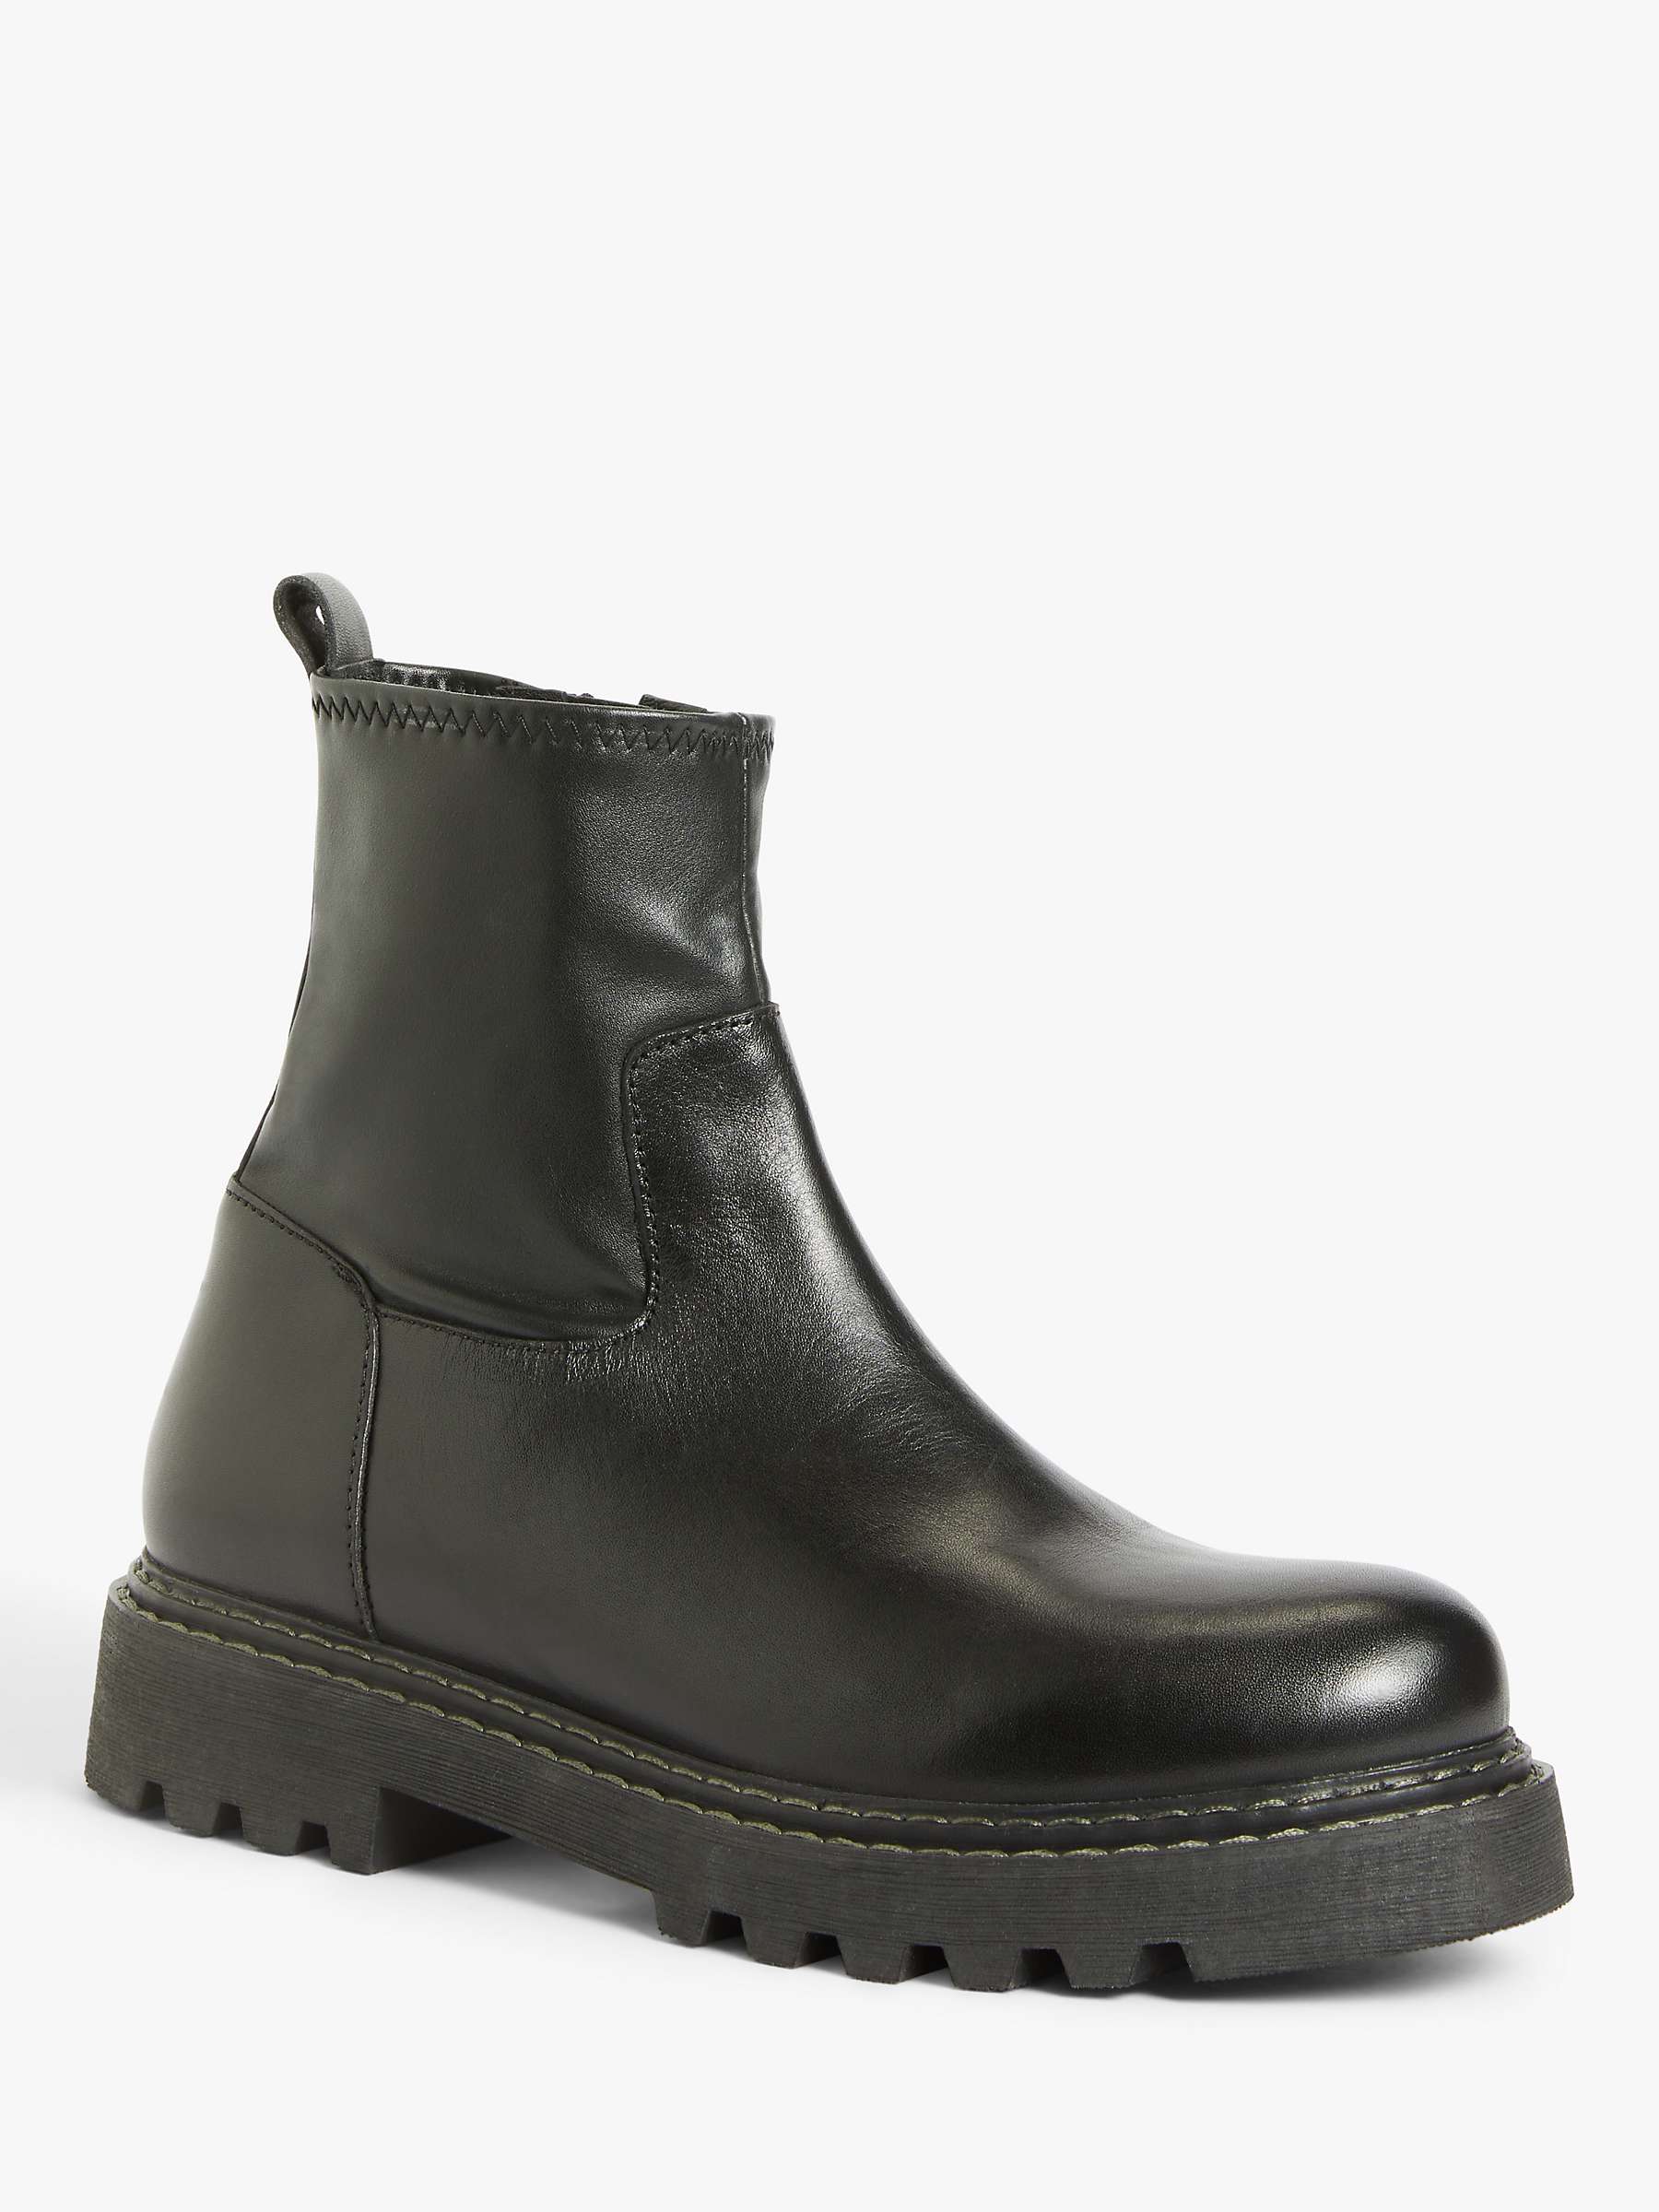 Buy Kin Perel Leather Chunky Sole Stretch Ankle Boots, Black Online at johnlewis.com